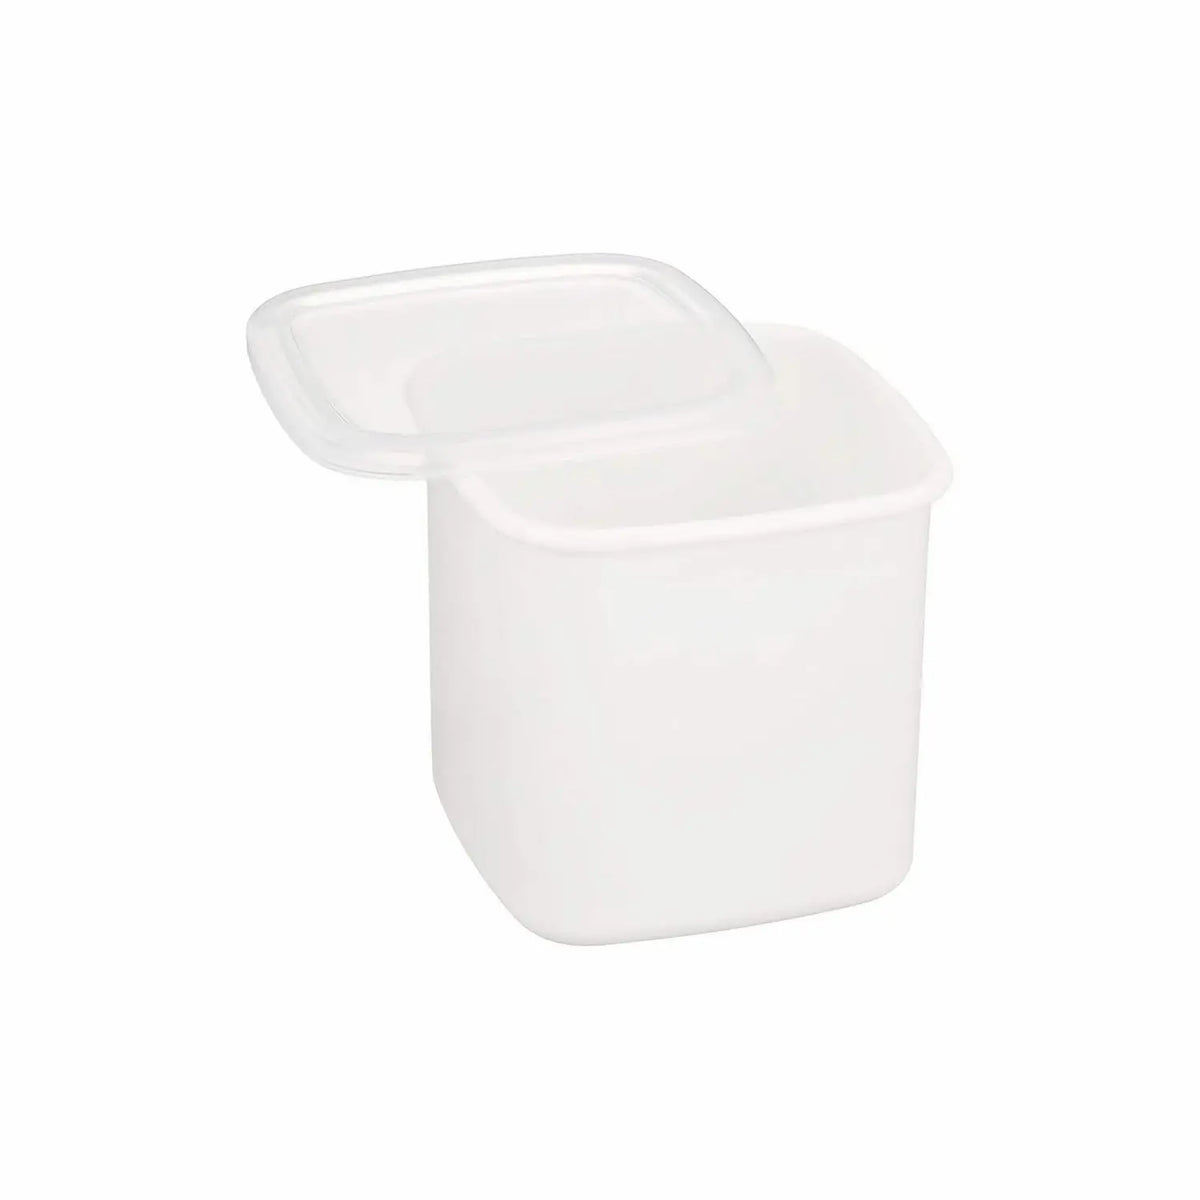 Noda Horo White Series Enamel Square Food Containers with Lid